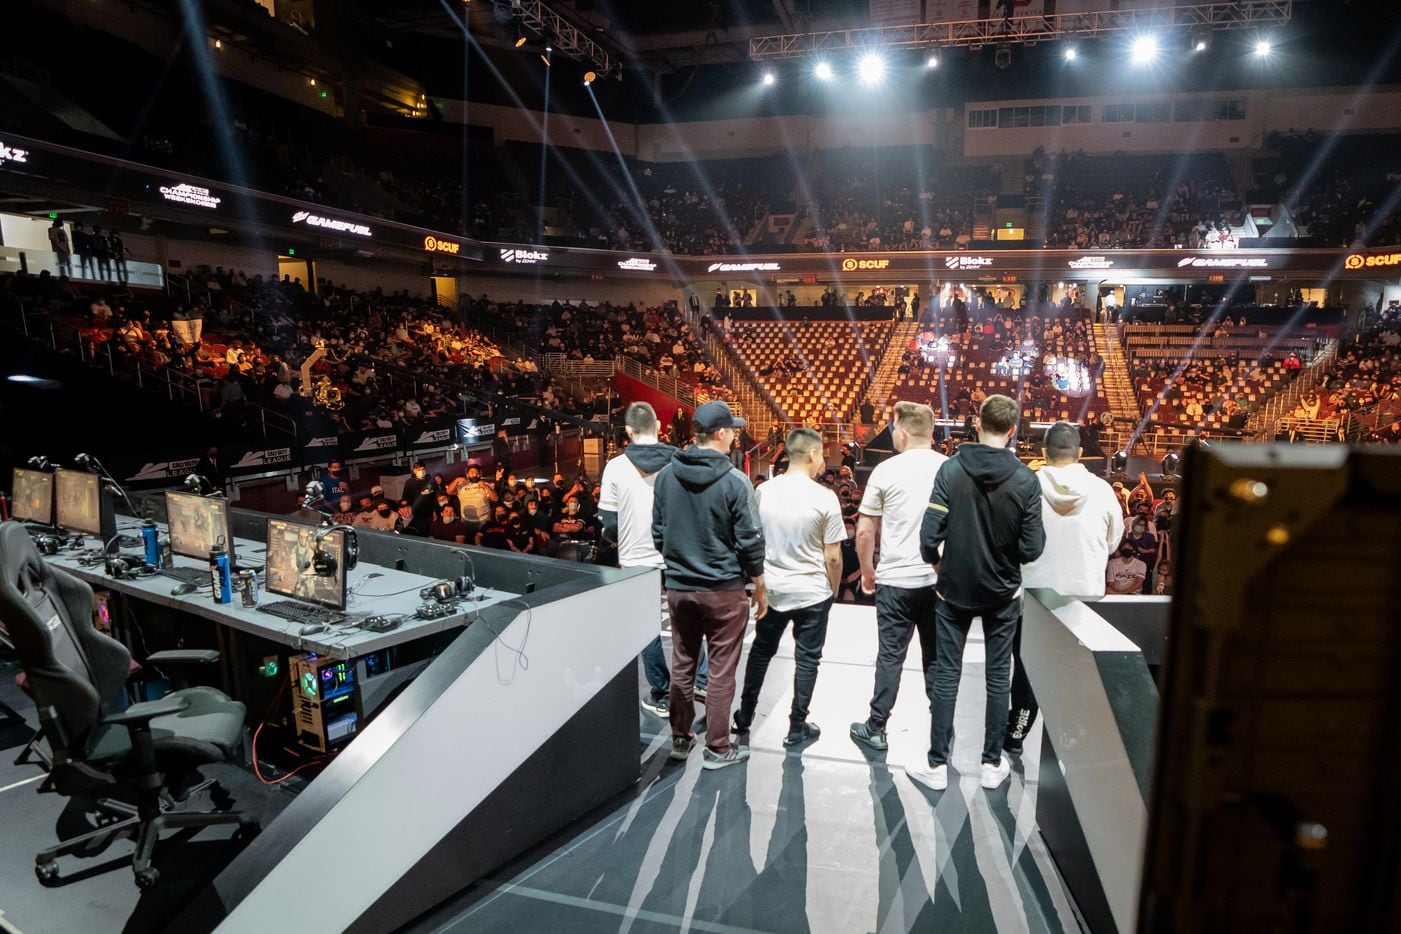 The Dallas Empire take the stage as they're introduced for their elimination match against the Toronto Ultra at the Call of Duty league playoffs at the Galen Center on Saturday, August 21, 2021 in Los Angeles, California. (Justin L. Stewart/Special Contributor)